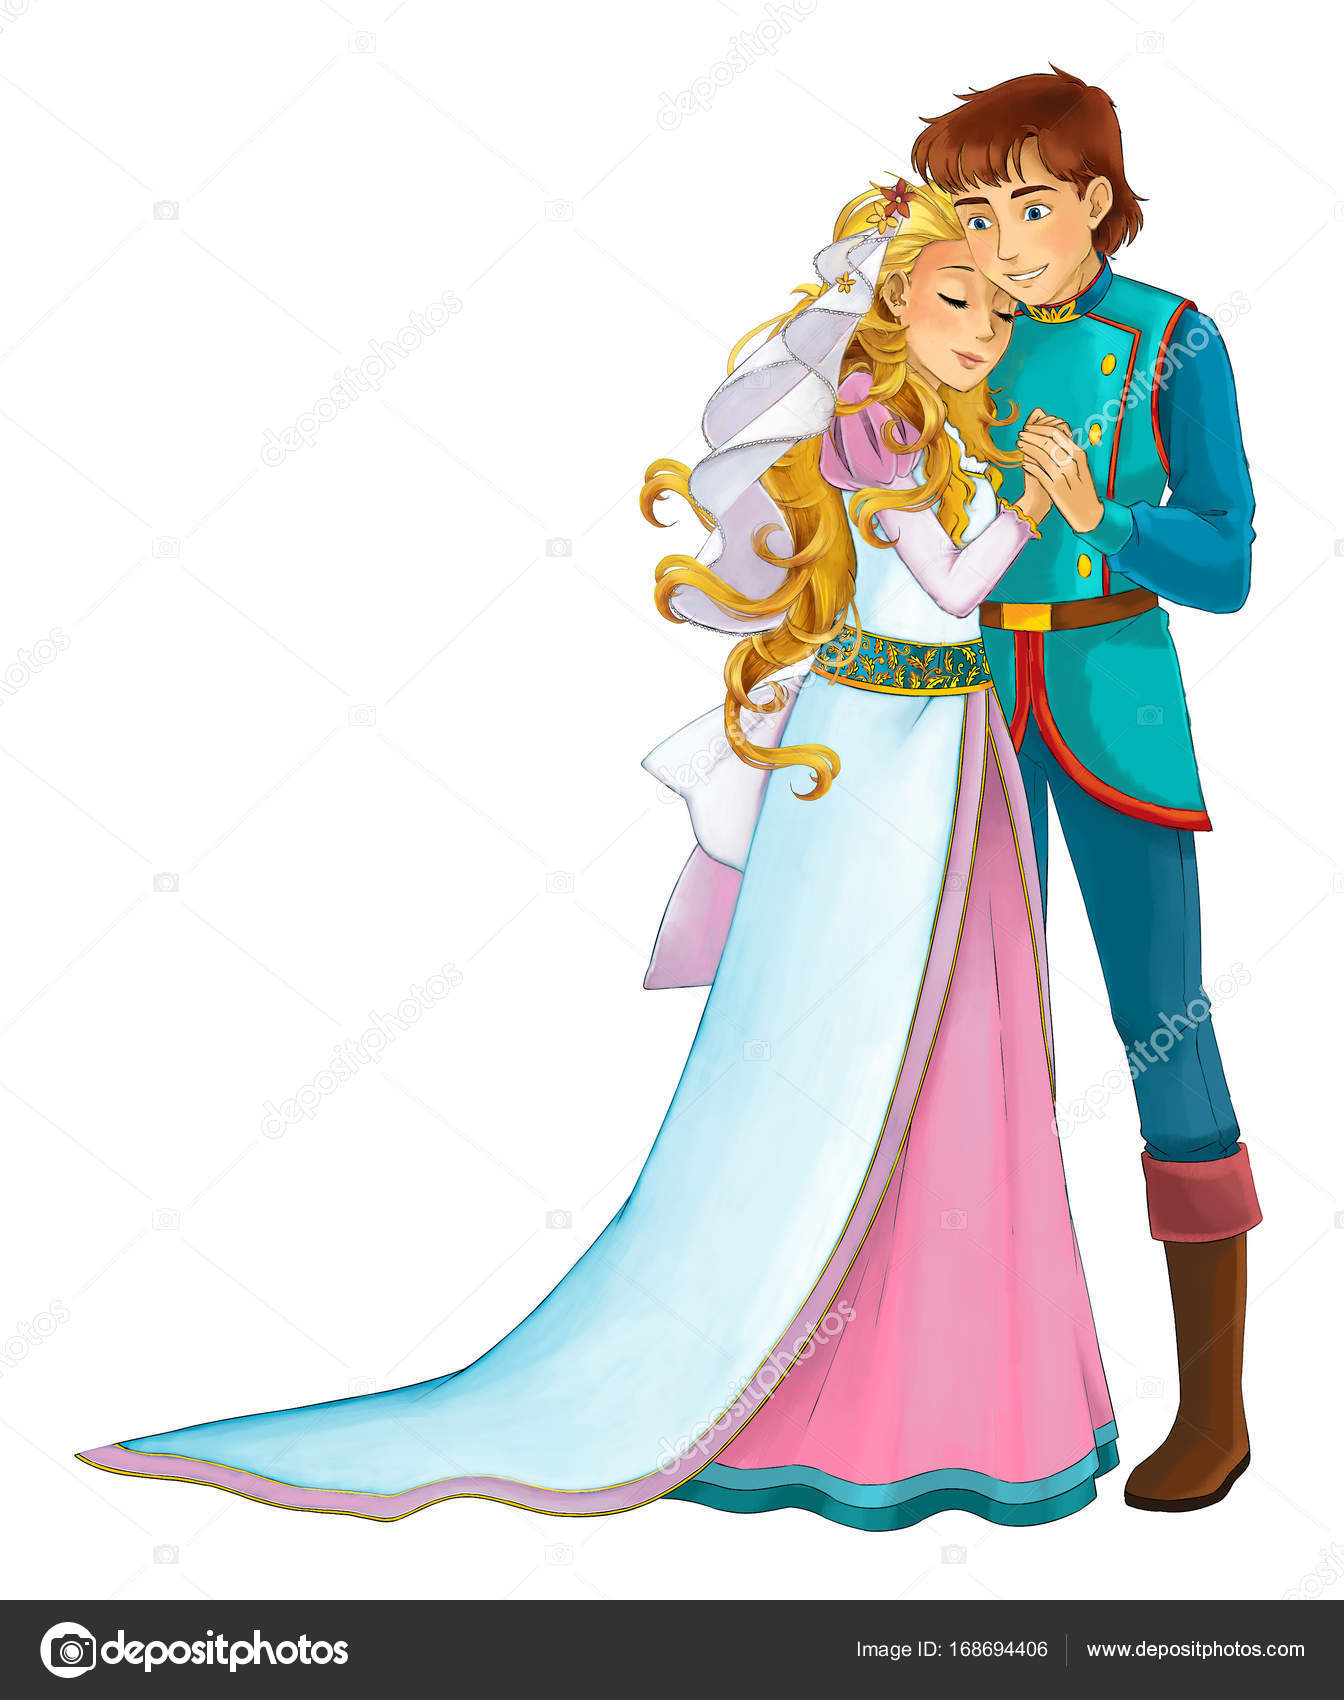 Cartoon Fairy Tale Characters Royal Couple Prince Princess White Background  Stock Photo by ©illustrator_hft 168694406